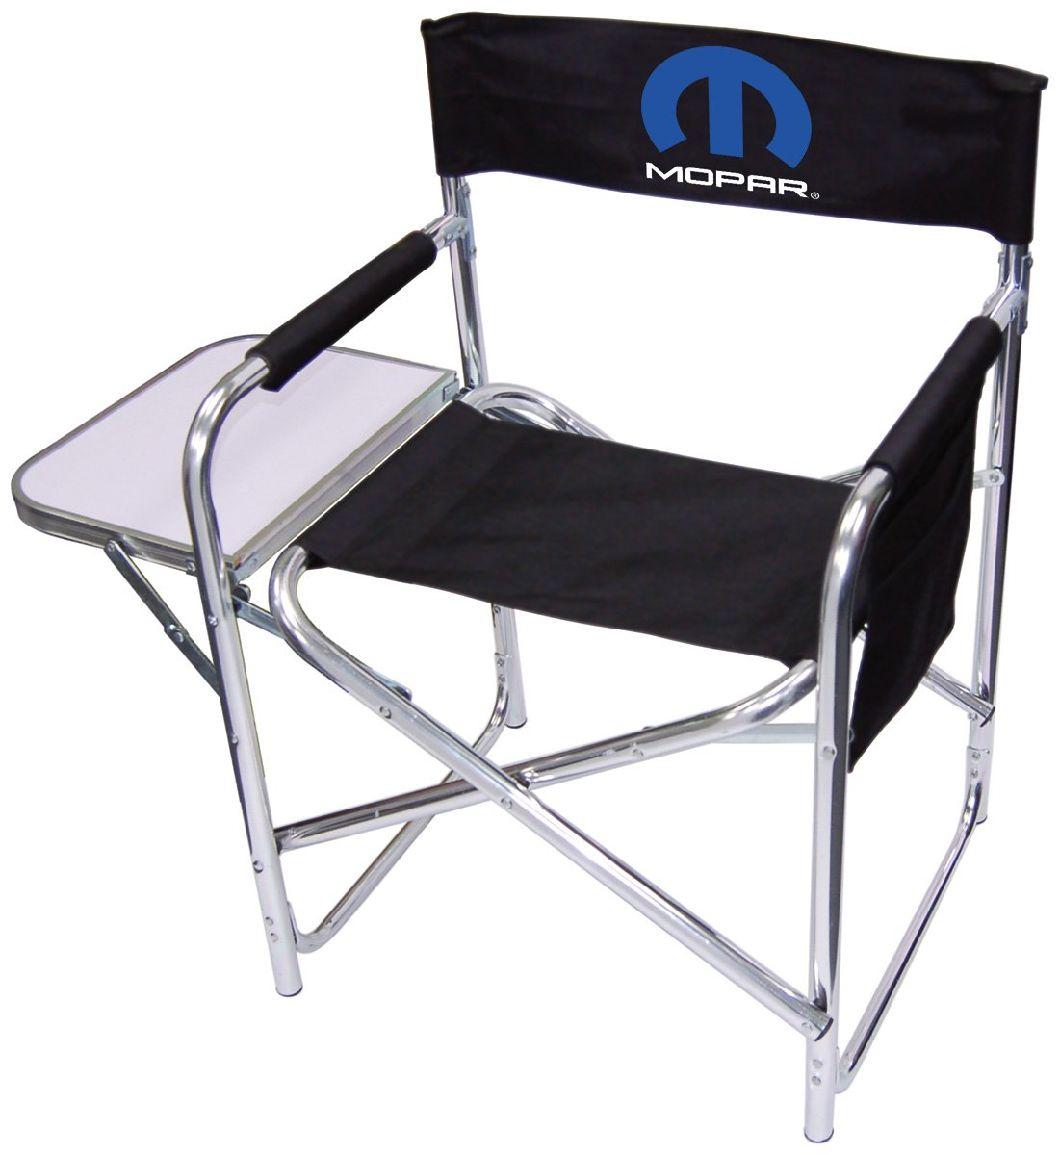 2PCS Aluminum Folding Director Chair with Side Table, Director Chair for Camping and Traveling, Beach Chair with Aluminum Frame